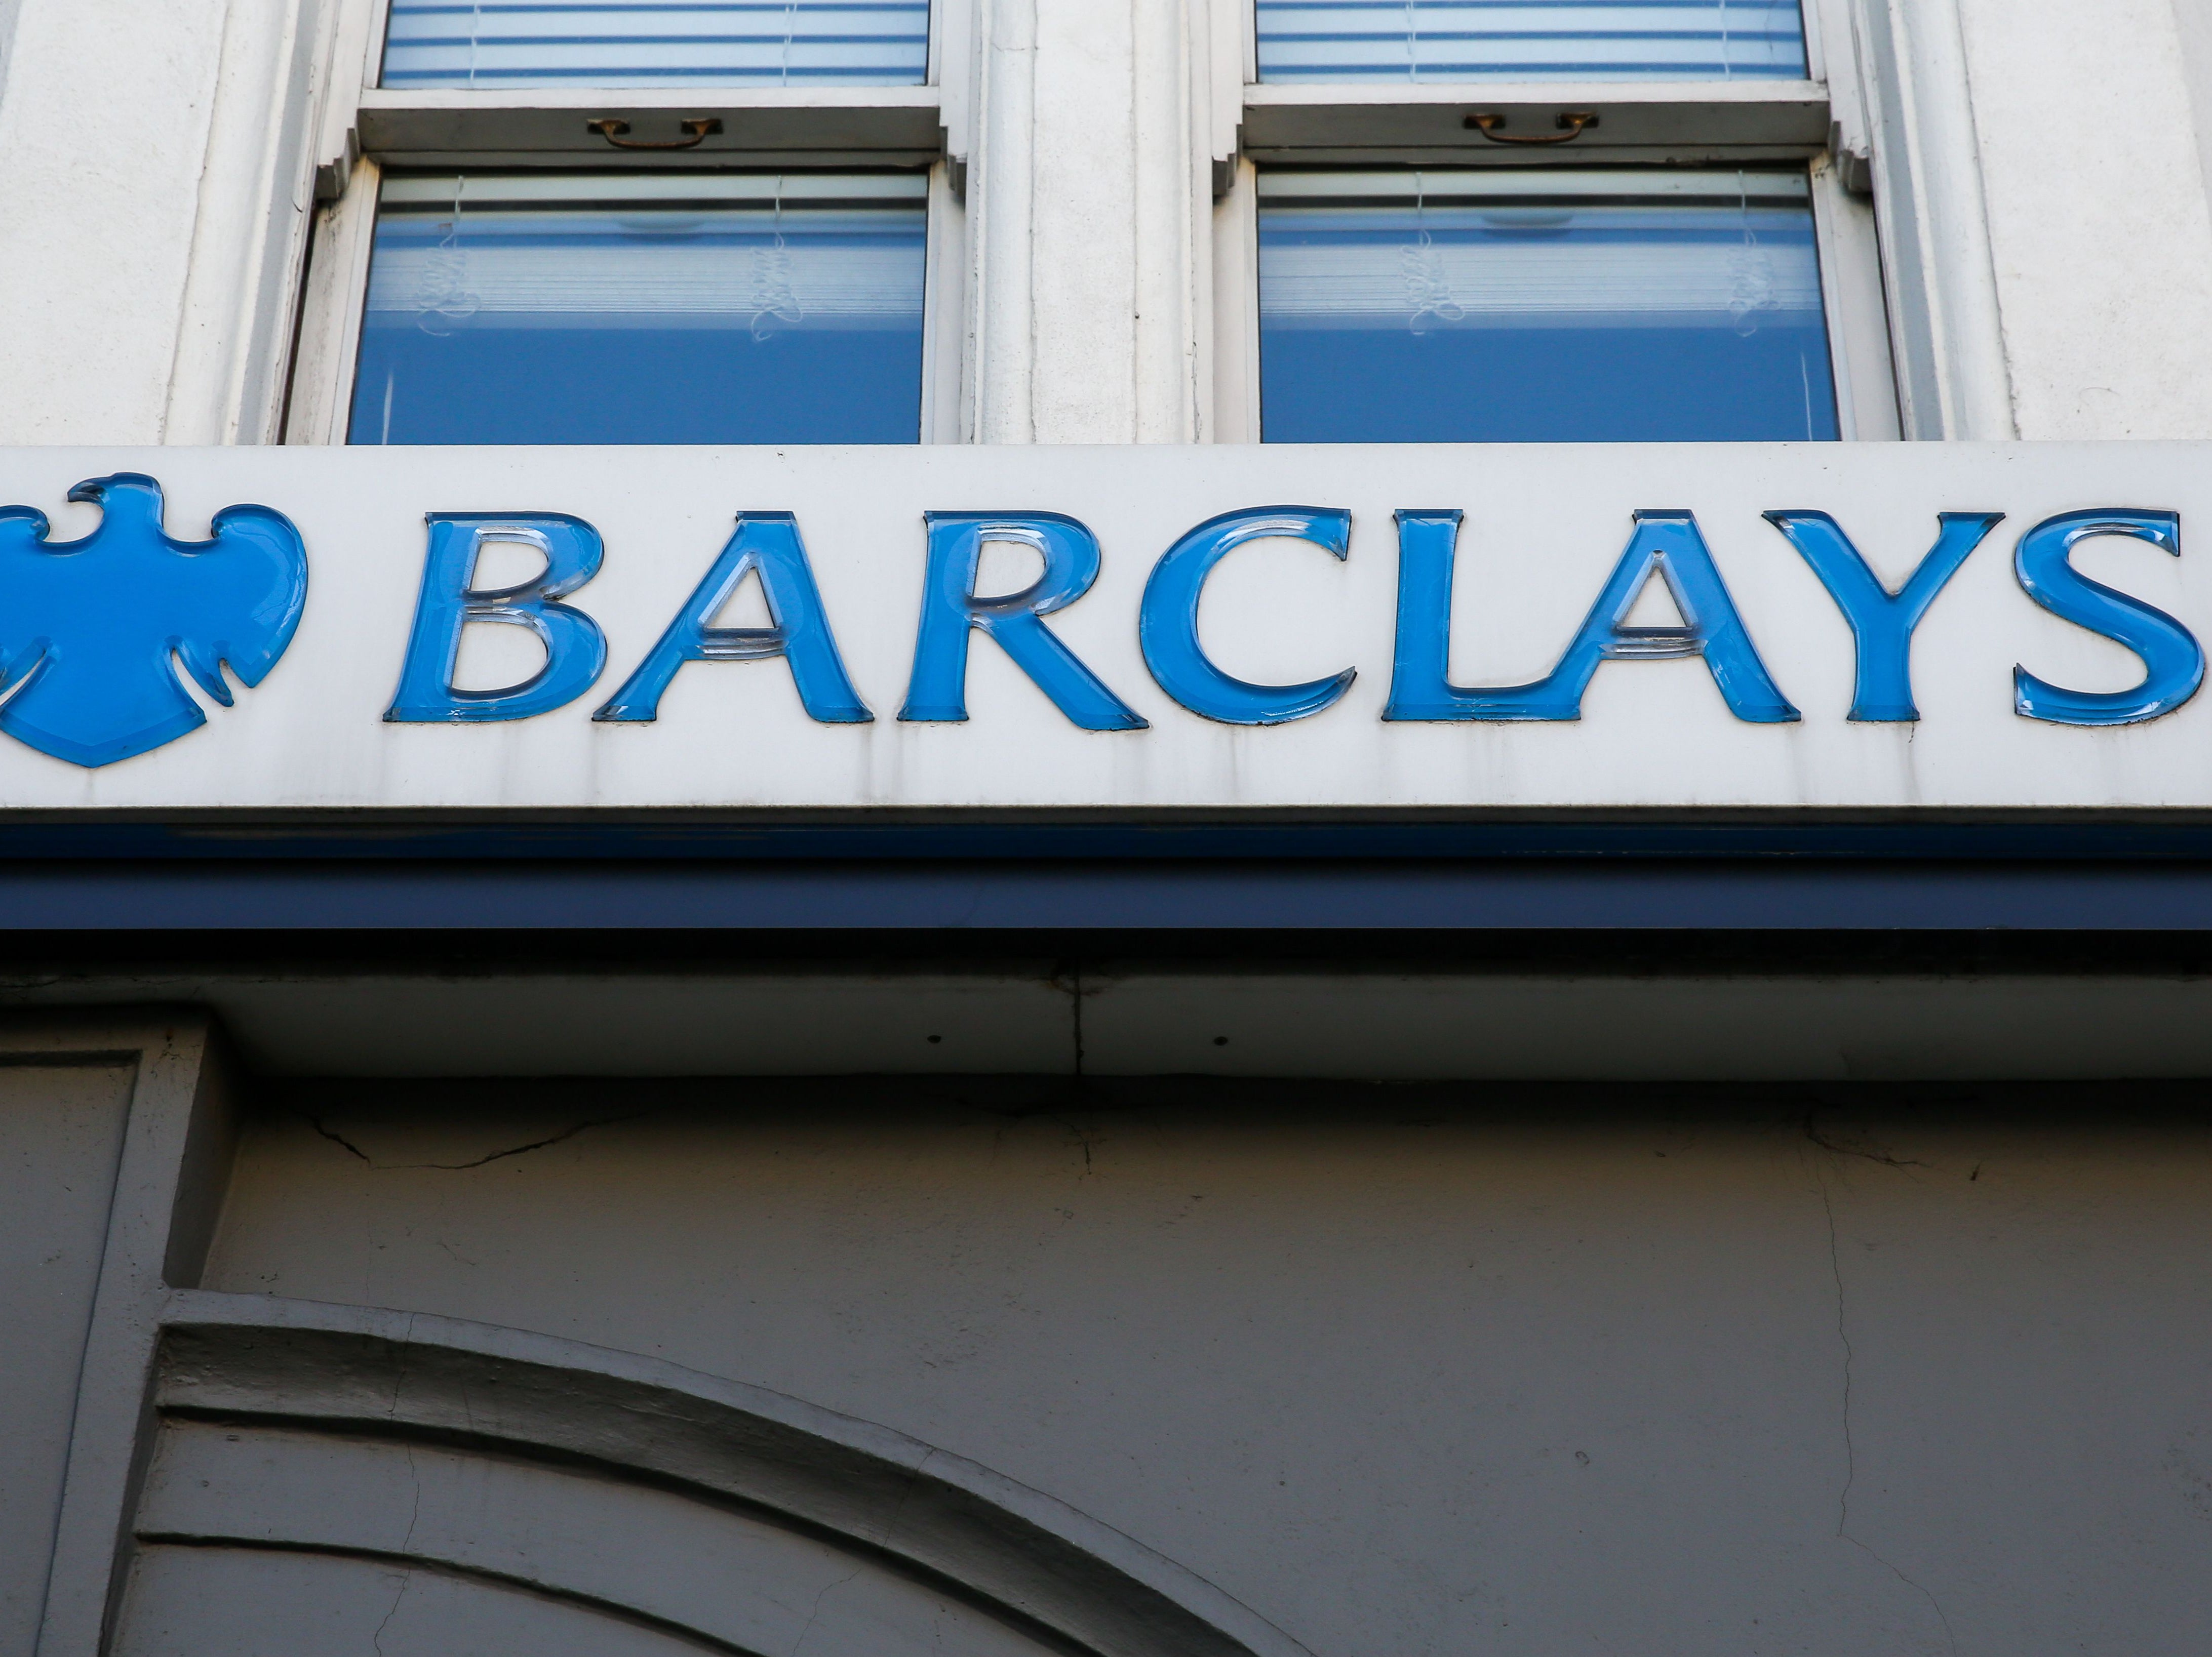 The tribunal ruled that the former Barclays banker is to receive compensation